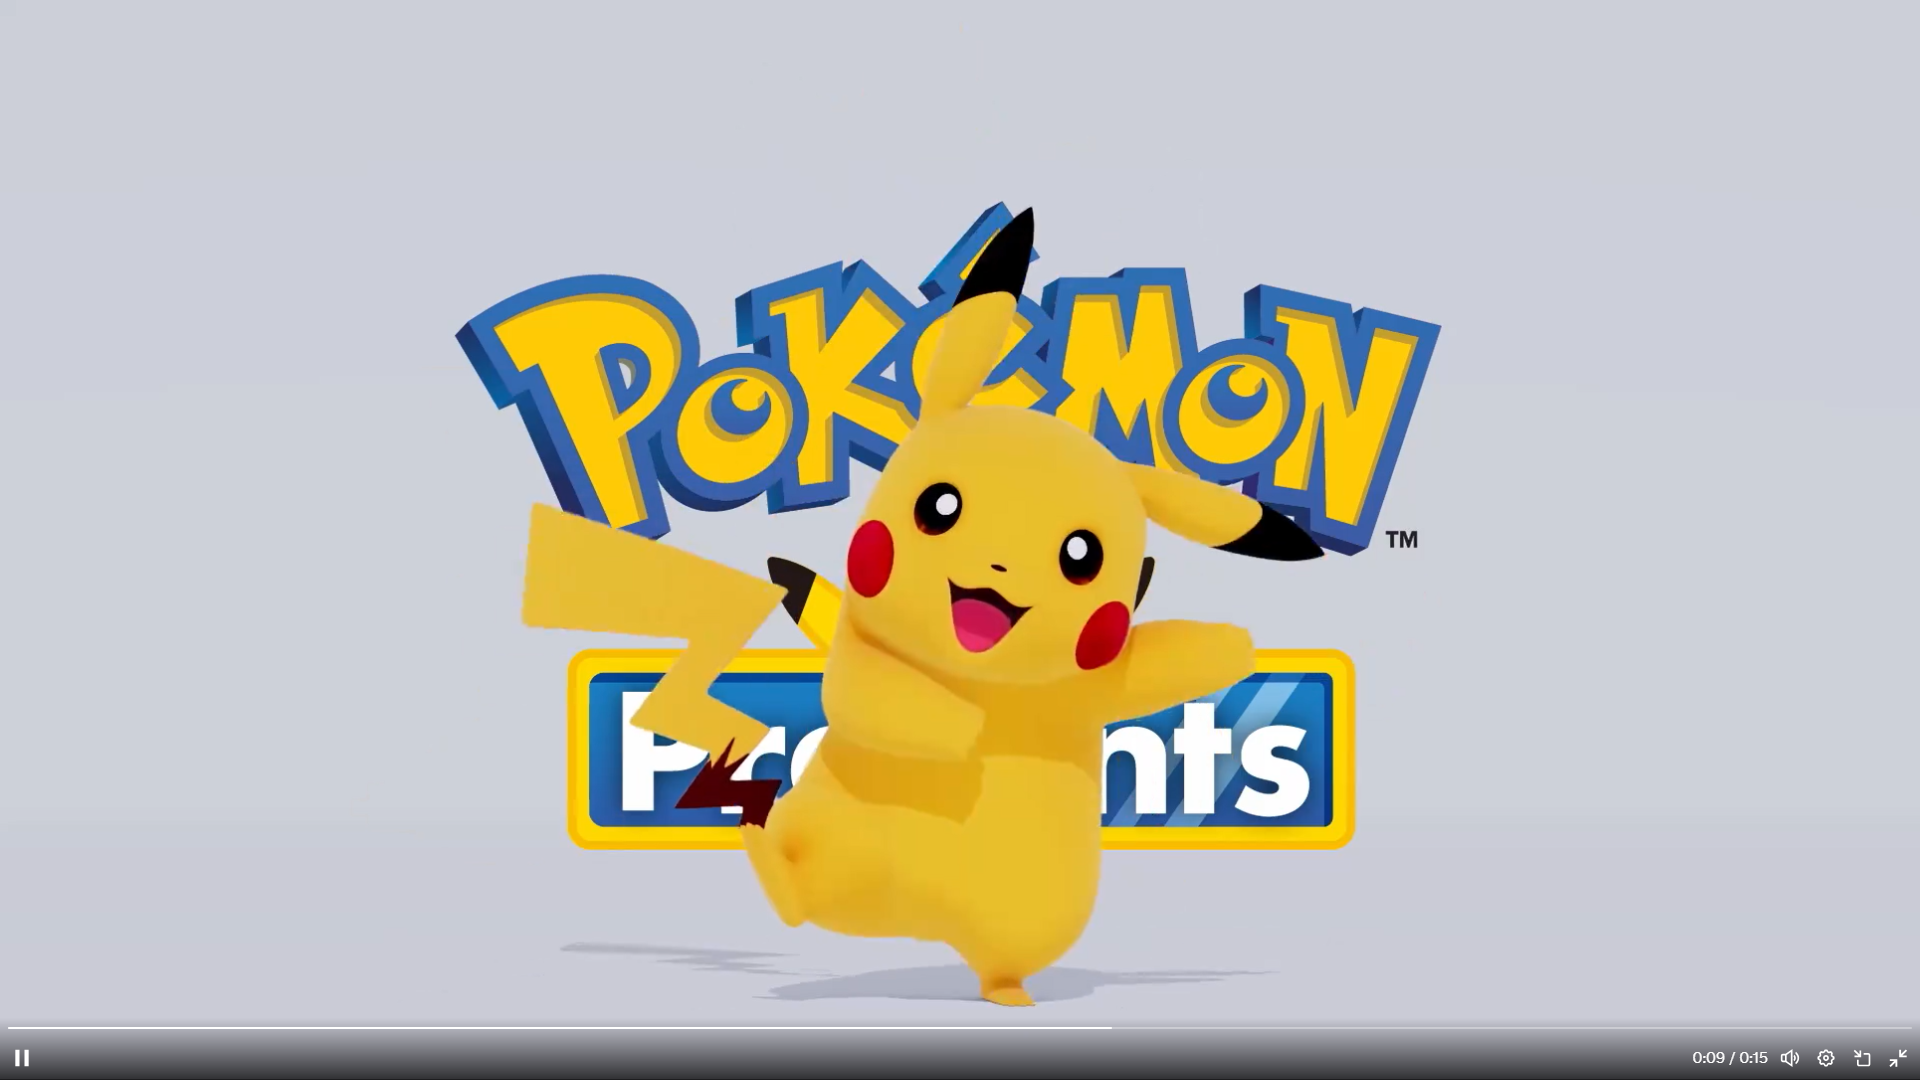 Pikachu in front of a banner that says “Pokémon Presents”